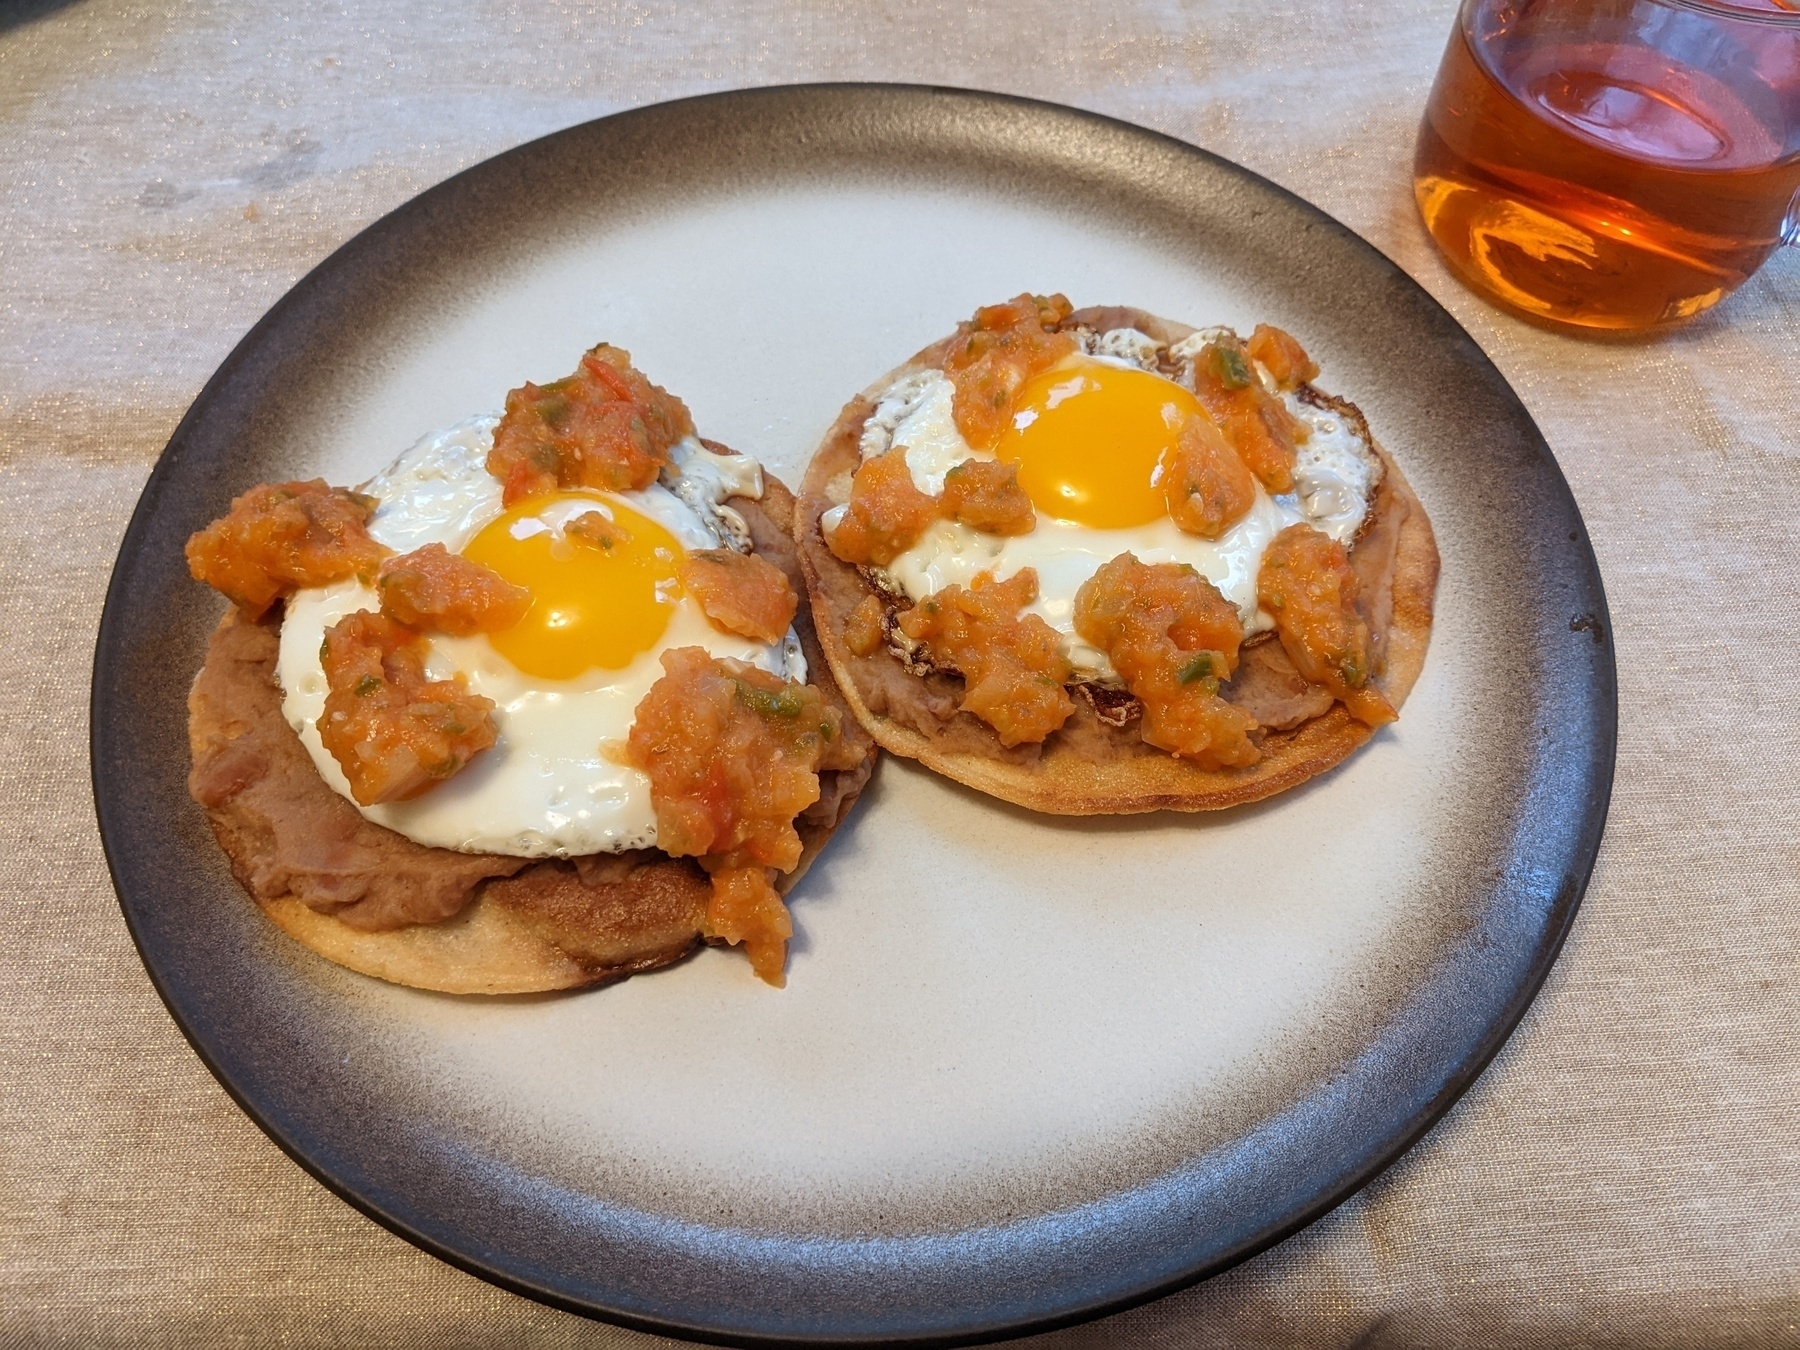 two fried tortillas topped with refried beans, a fried egg, and salsa on a brown and white Heath plate